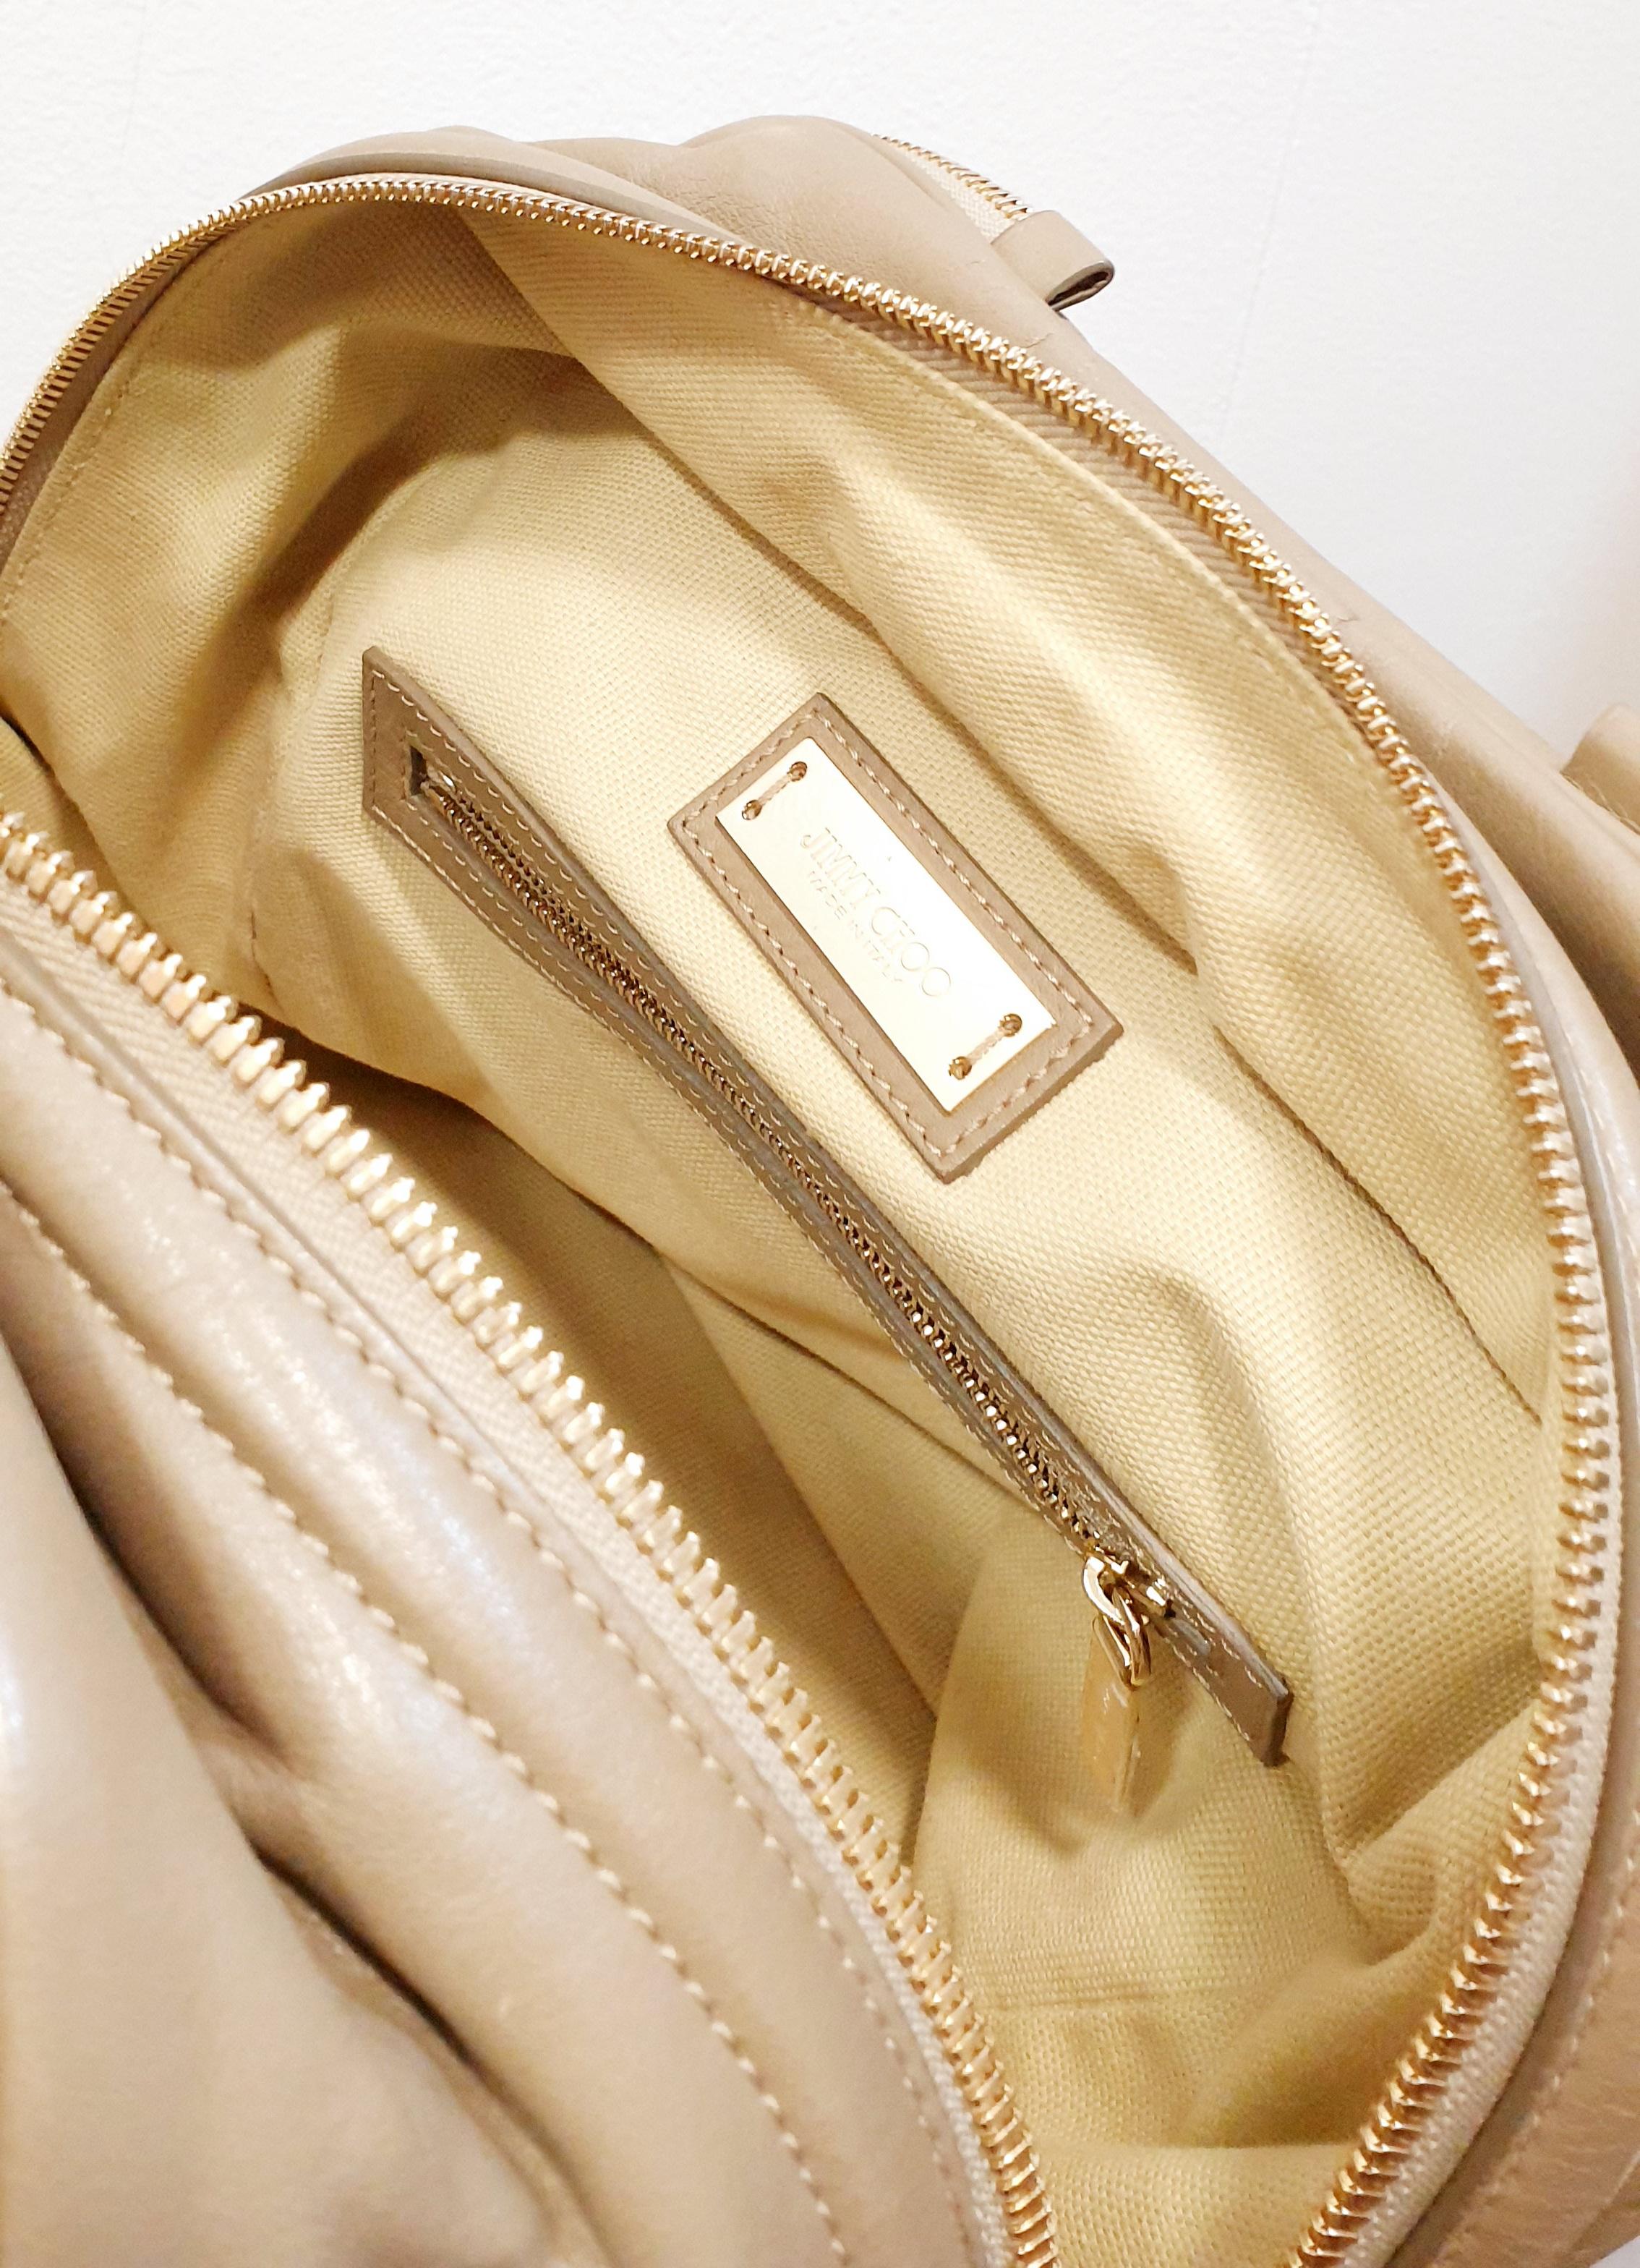 Jimmy Choo Justine  Leather Handbag - Taupe In Excellent Condition For Sale In  Bilbao, ES